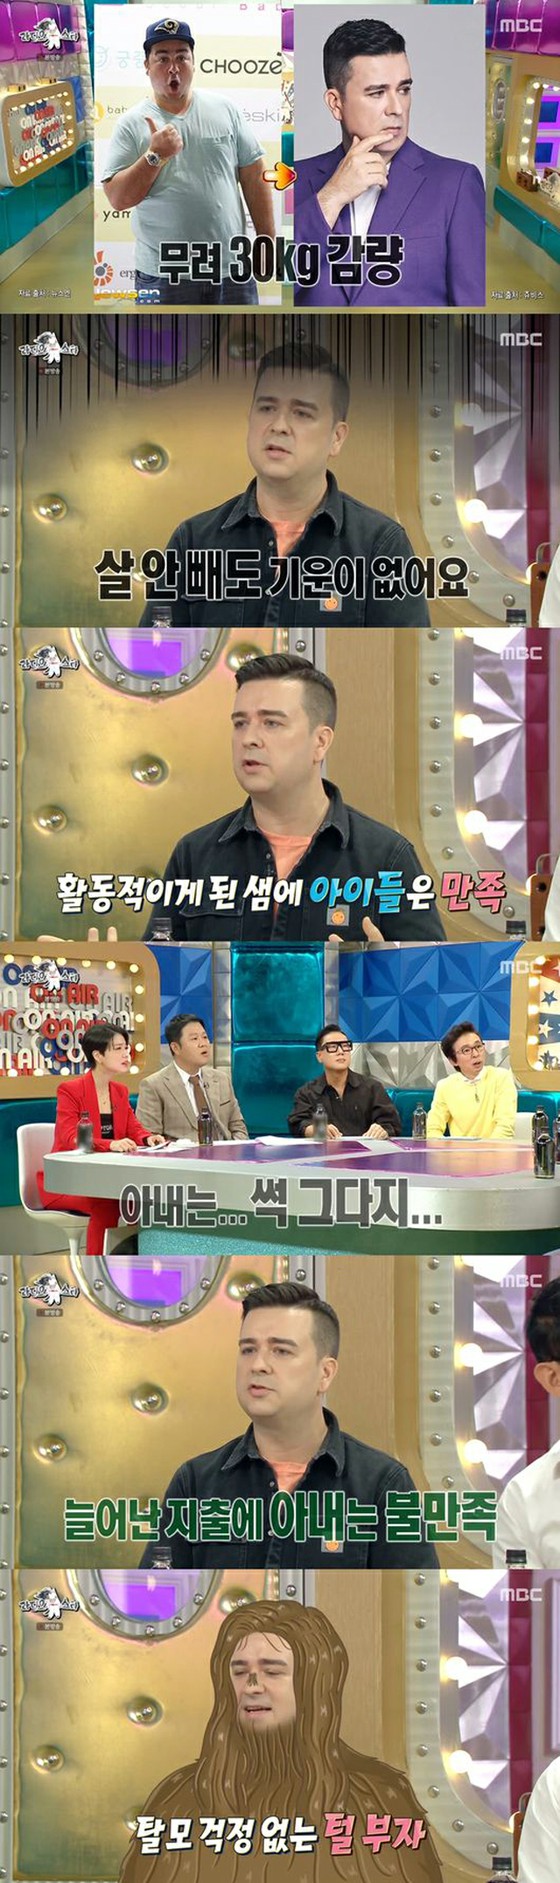 Sam Hammington loses 30kg on the show and appears slim, and he shares his wife's comment.